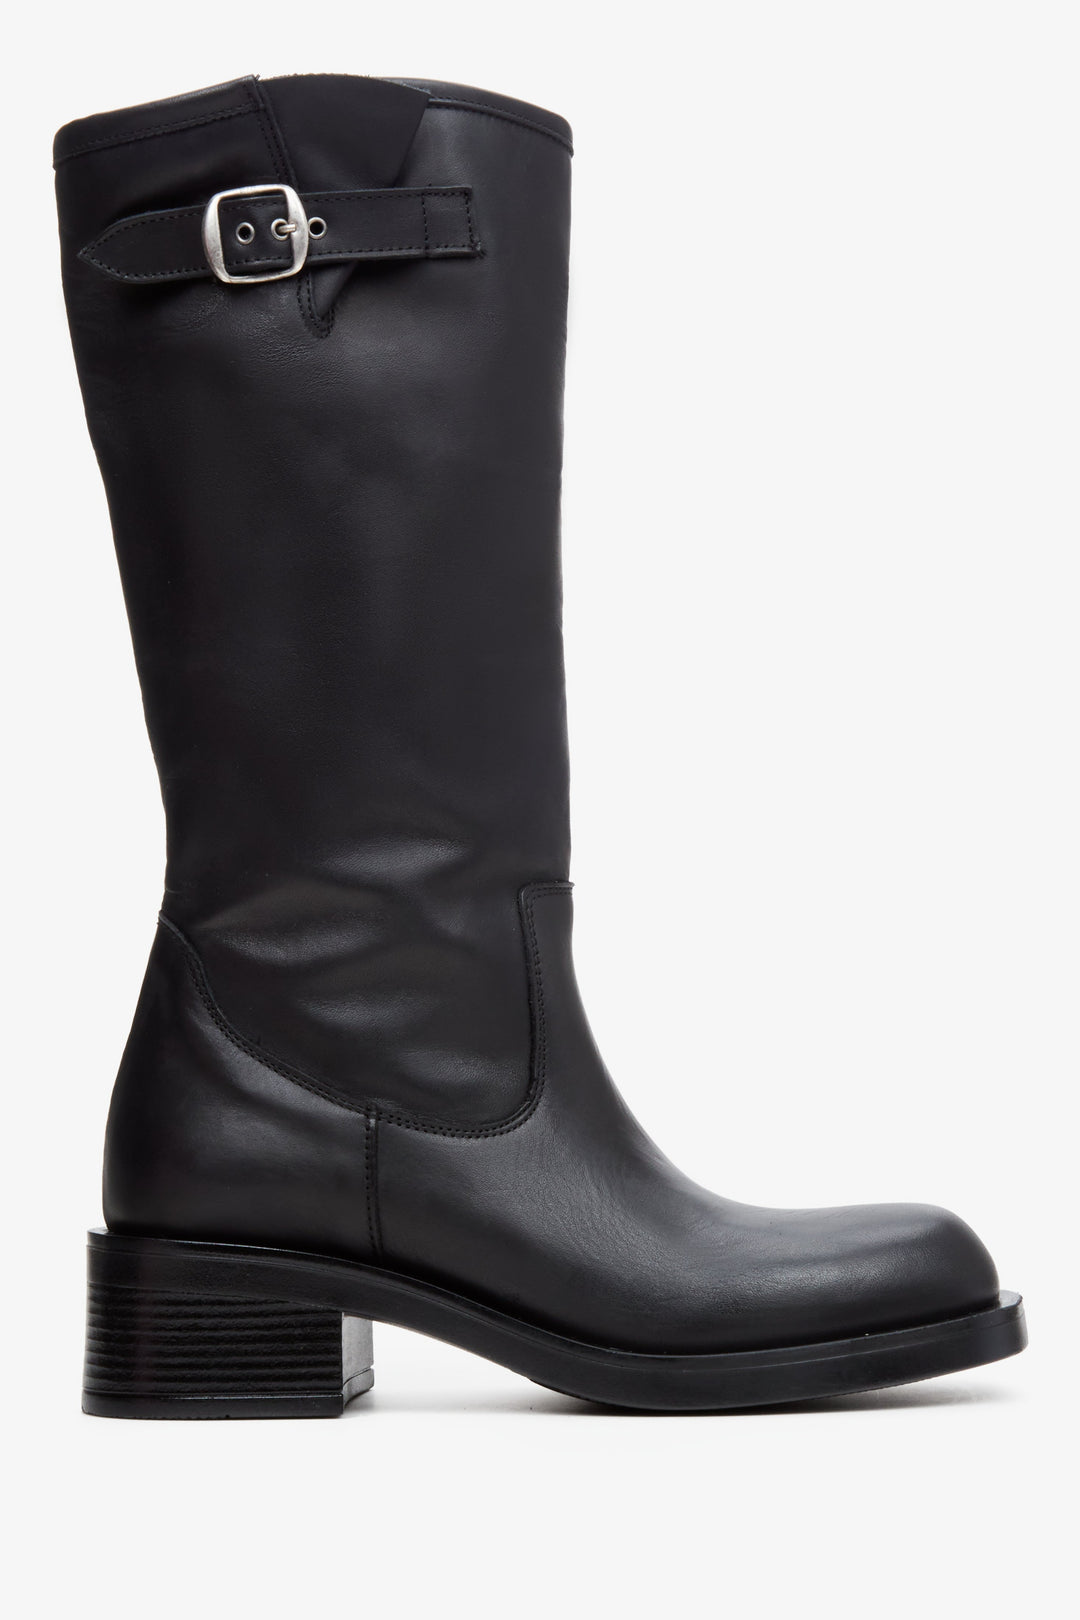 Women's Black Boots made of Italian Genuine Leather with a Stable Heel Estro ER00113611.